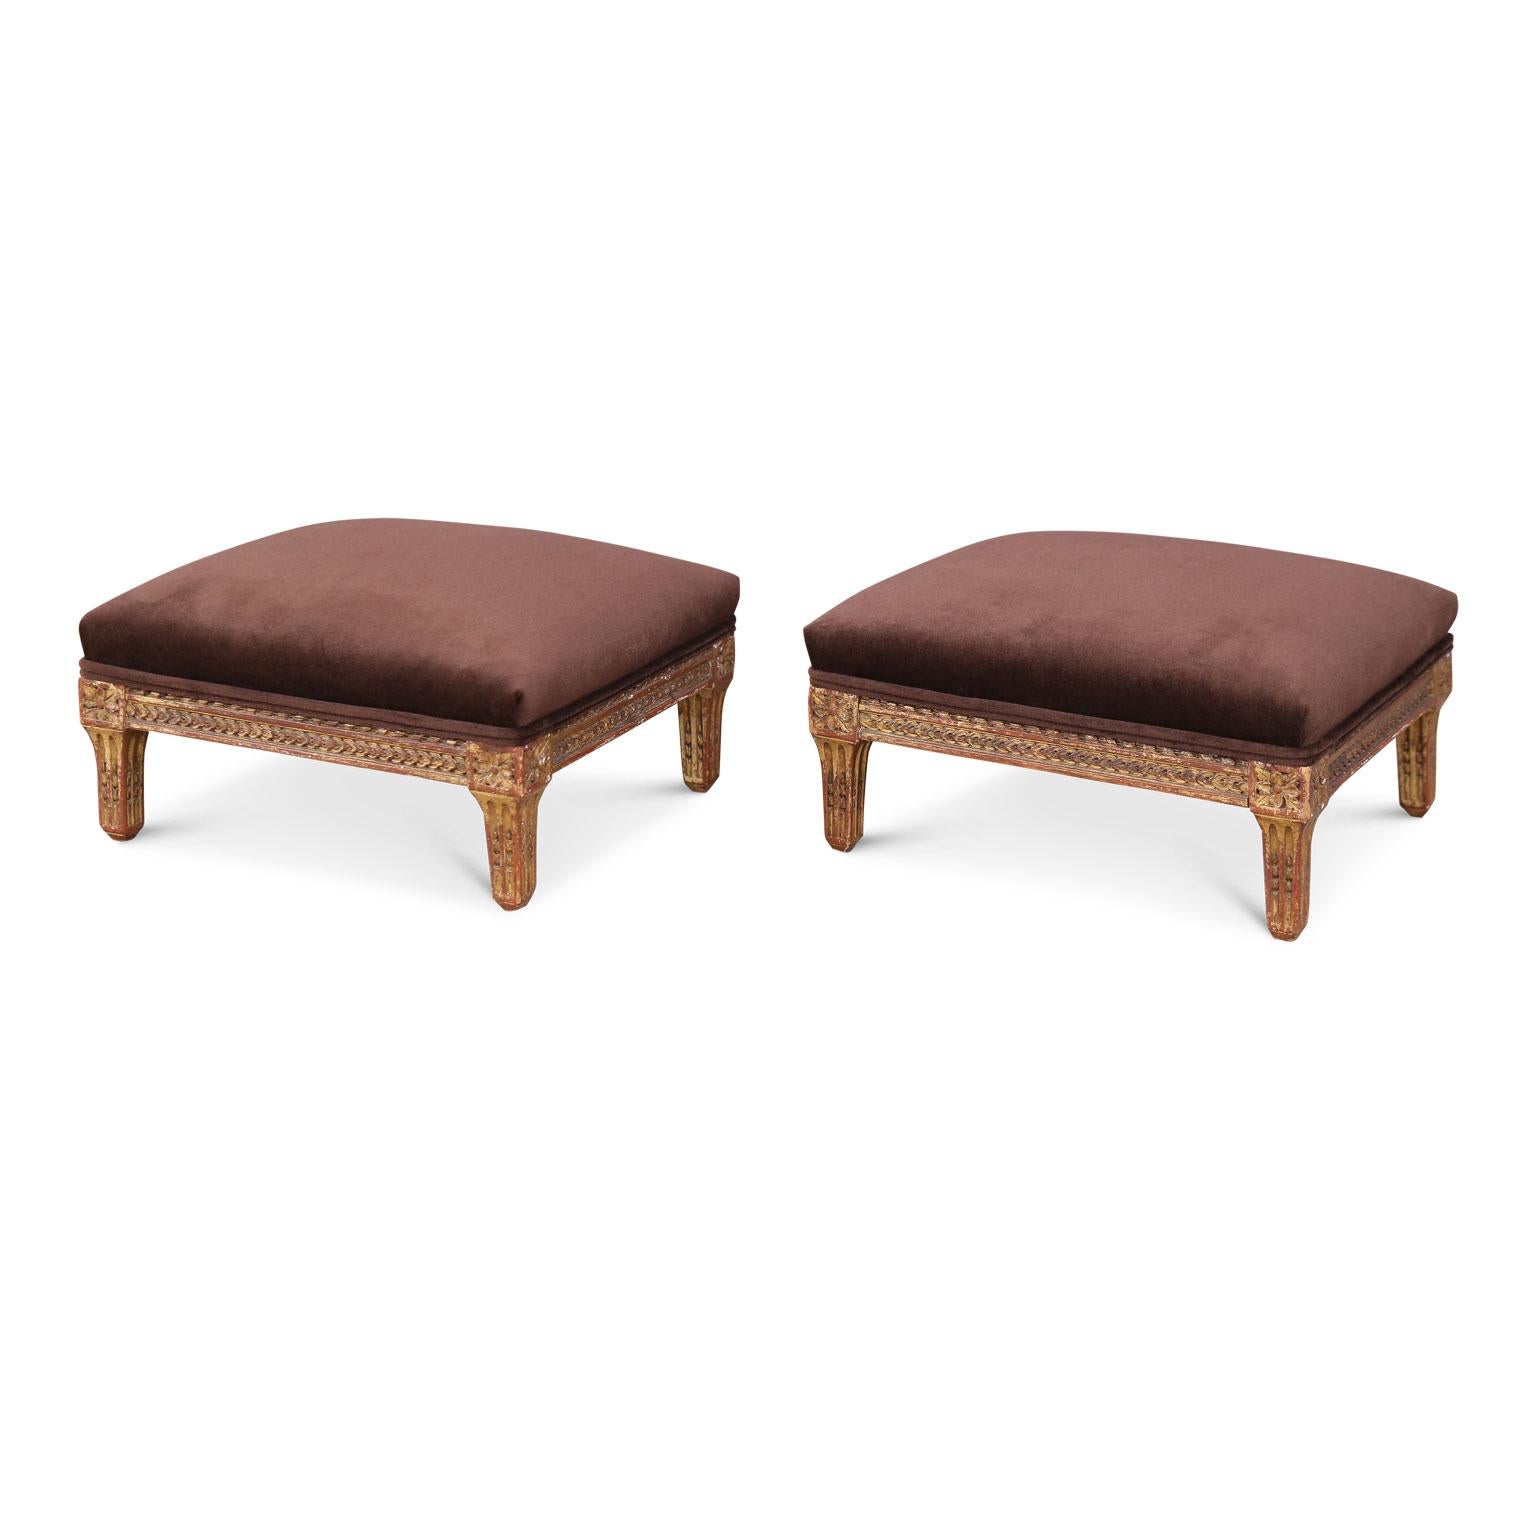 Two Italian giltwood footstools, neoclassical in style, hand-carved in the early 19th century and newly reupholstered. Sold as a pair.